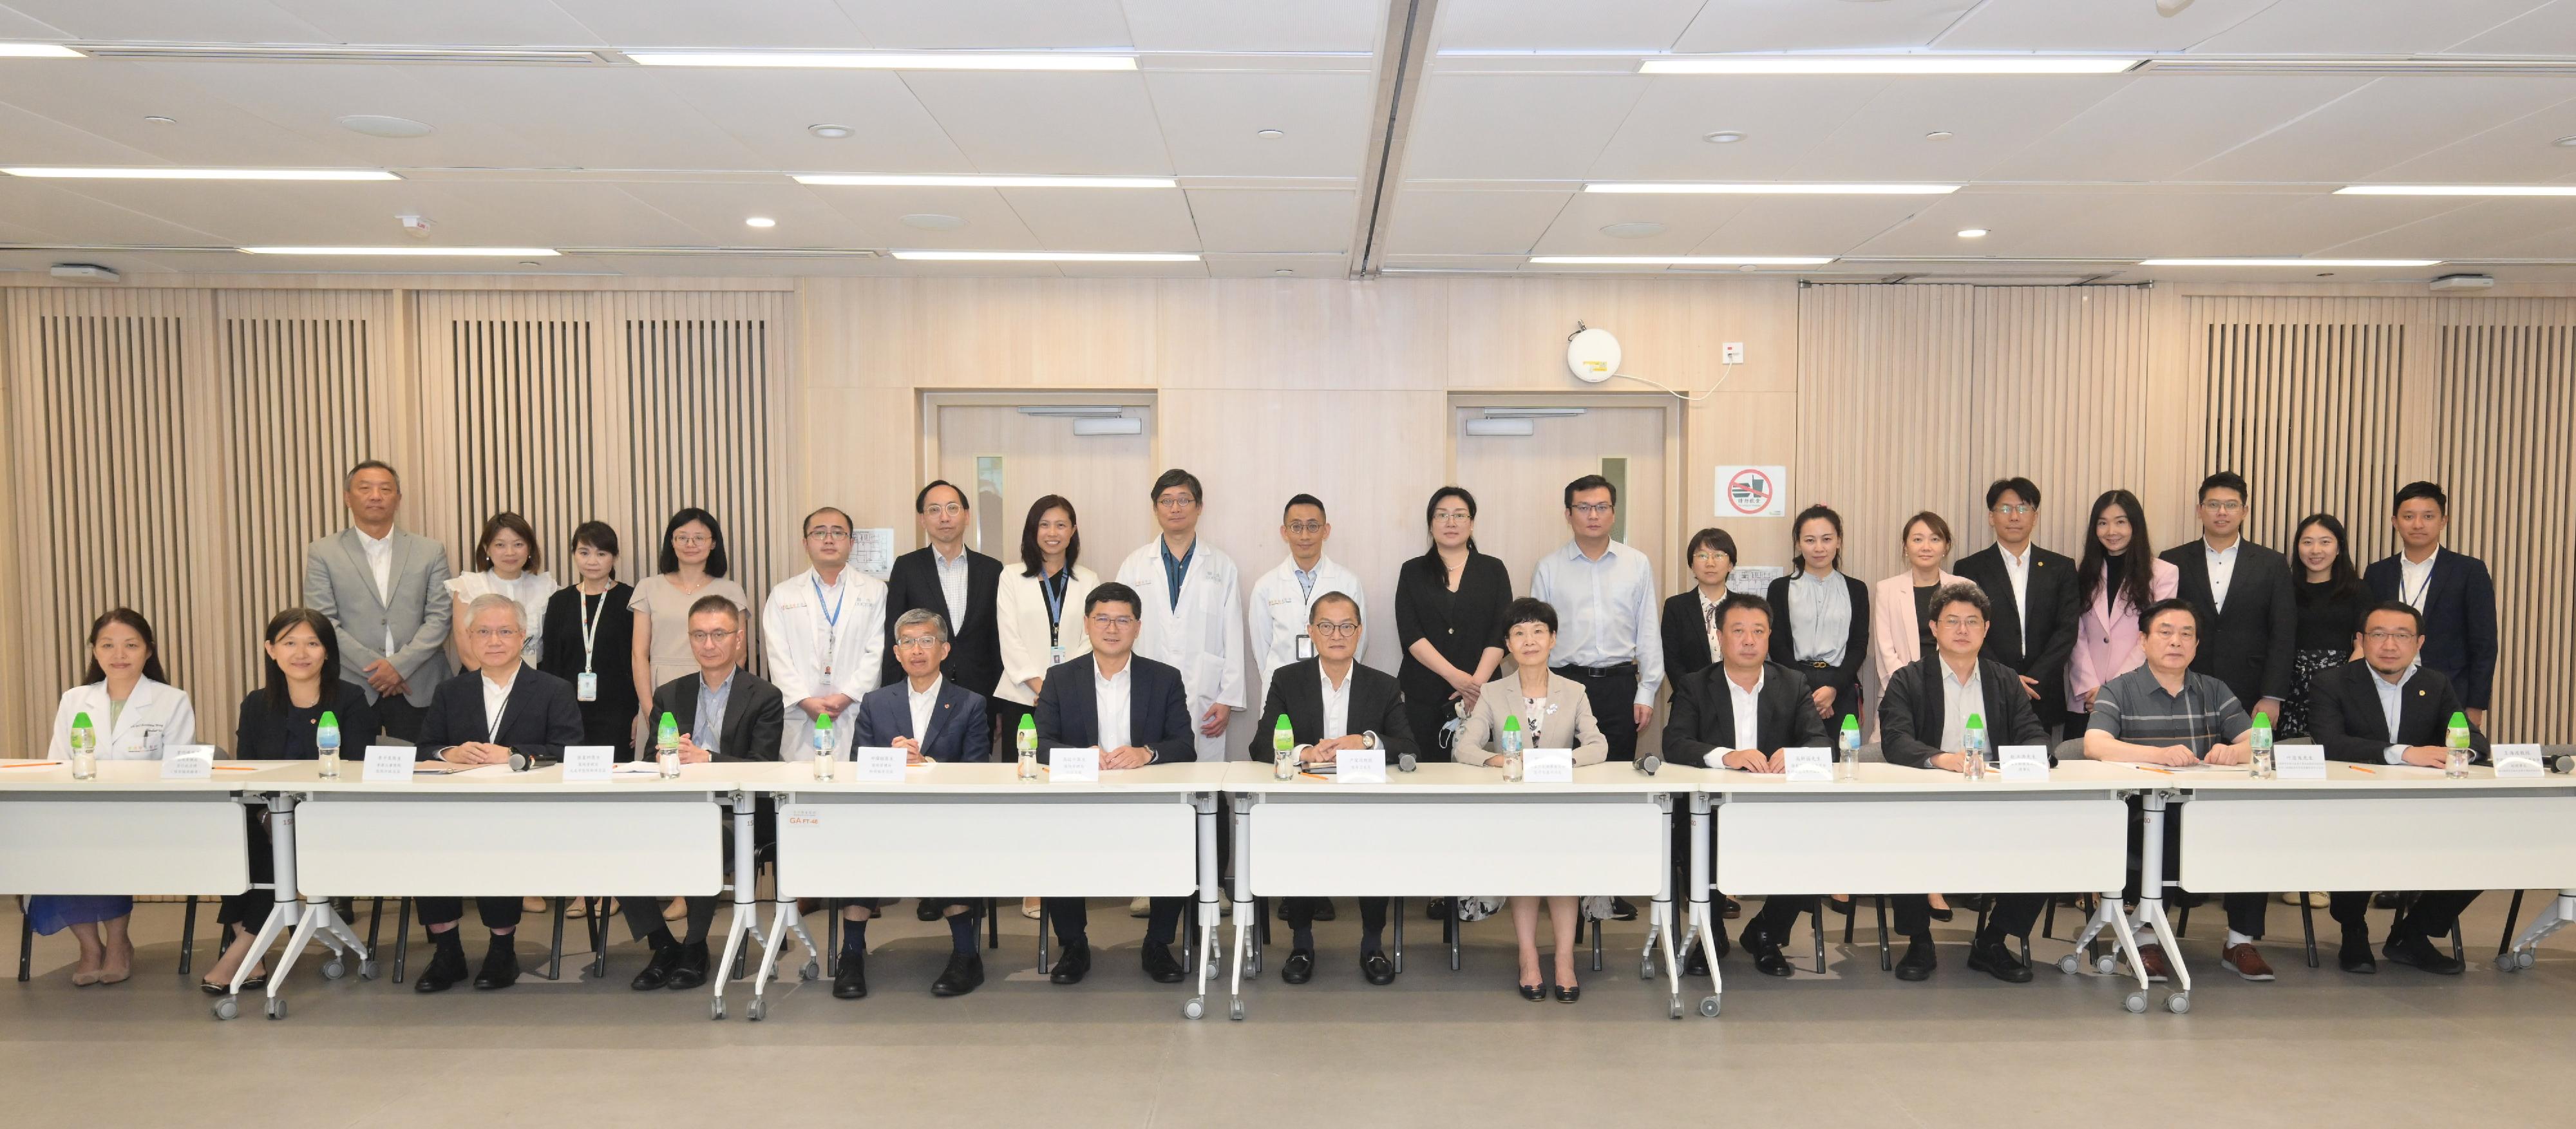 The Secretary for Health, Professor Lo Chung-mau, joined the delegation led by the Director-General of the Department of Medical Emergency Response of the National Health Commission, Ms Guo Yanhong, to visit the Hong Kong Children’s Hospital (HKCH) this afternoon (August 26). Photo shows Professor Lo (front row, sixth right); Ms Guo (front row, fifth right); the Chief Executive of the Hospital Authority, Dr Tony Ko (front row, sixth left); members of the delegation and healthcare personnel of the HKCH.